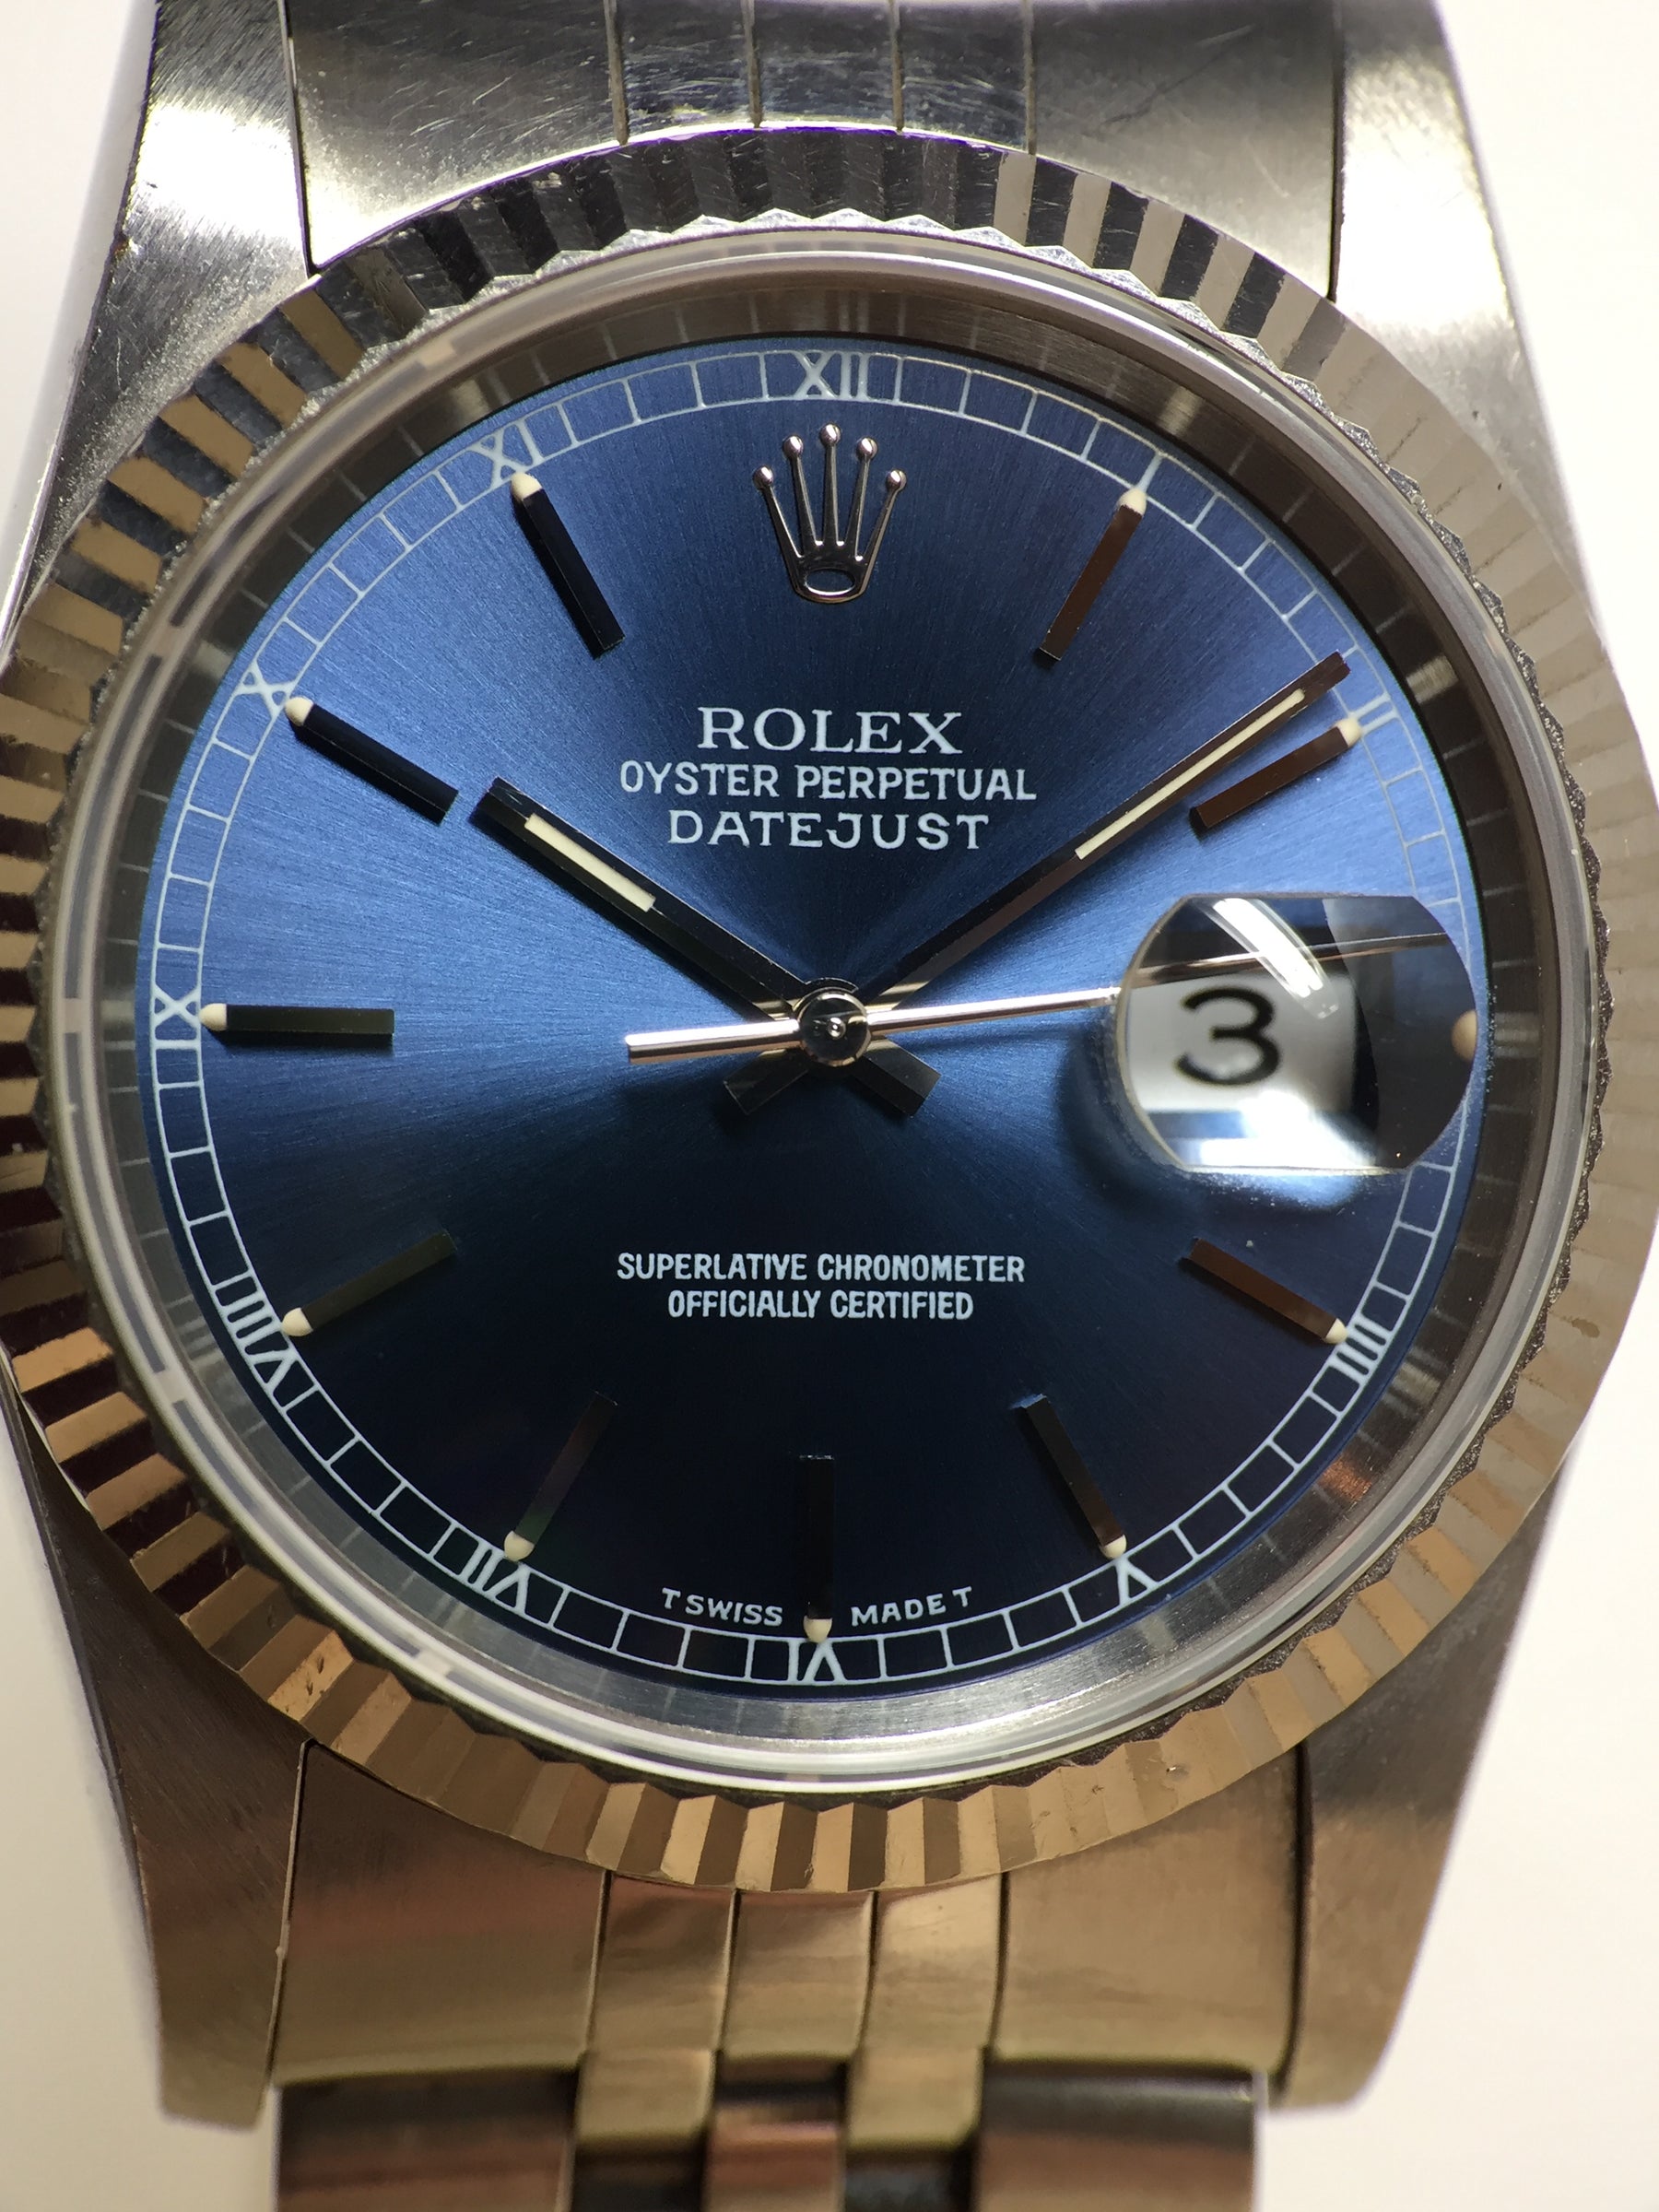 Rolex Datejust Ref. 16234 Year 1996 (with Papers)